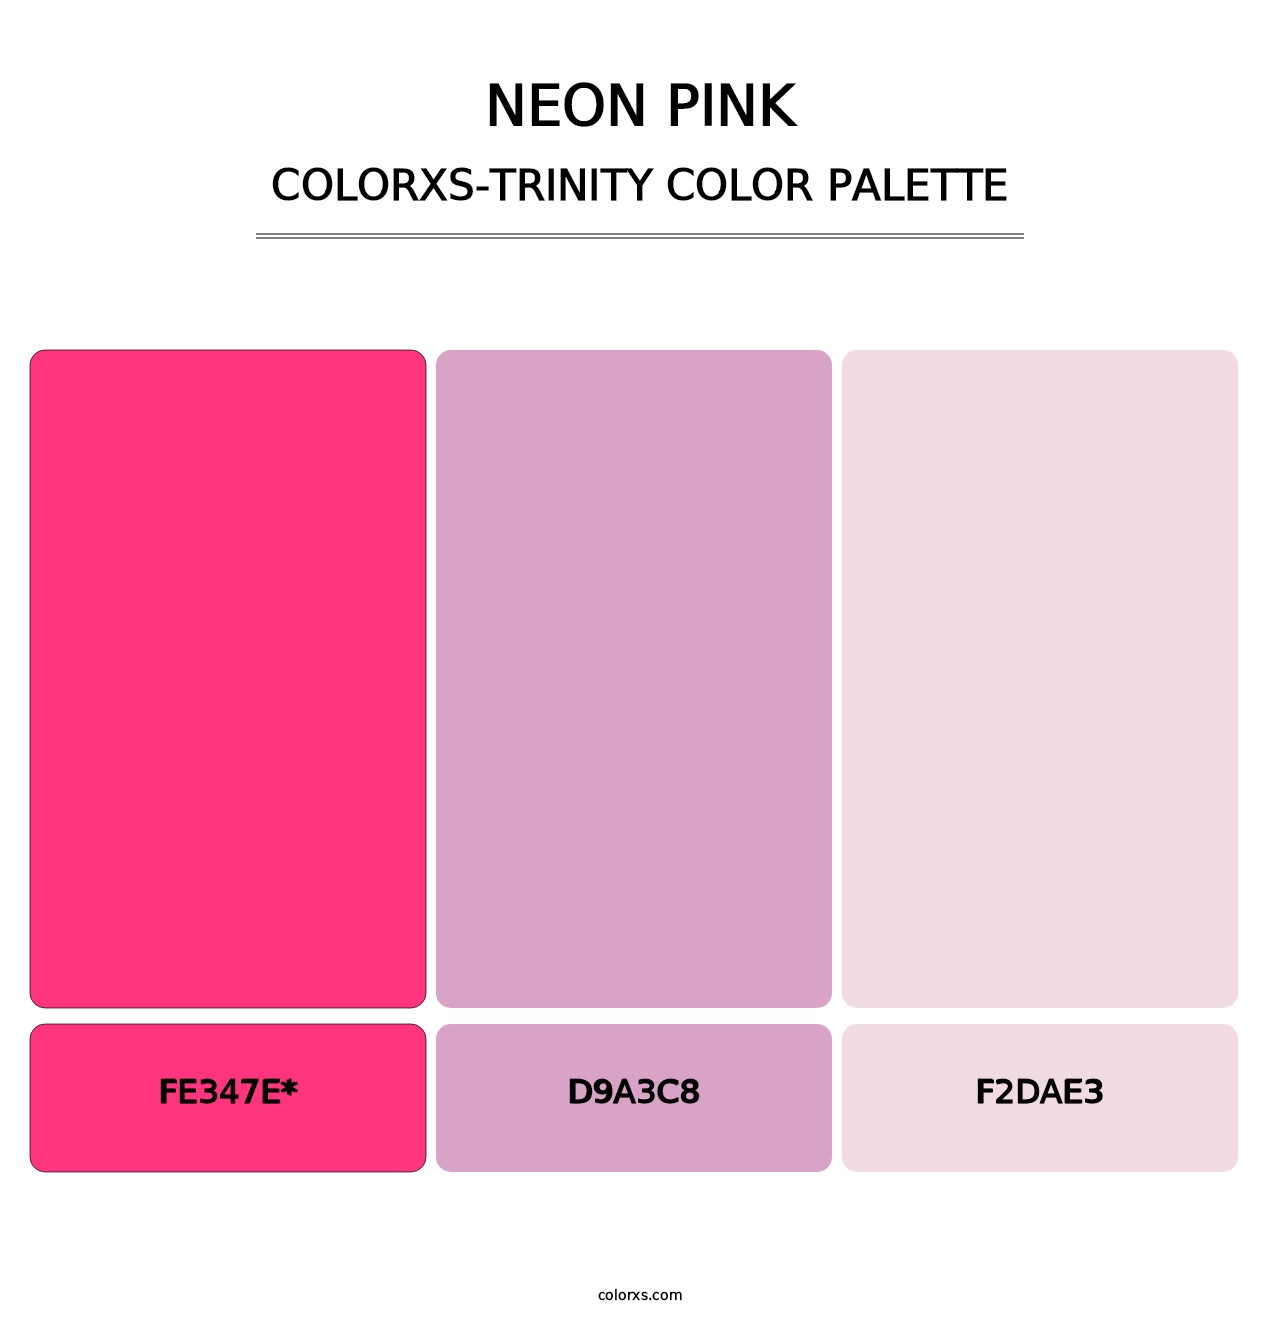 Neon Pink - Colorxs Trinity Palette